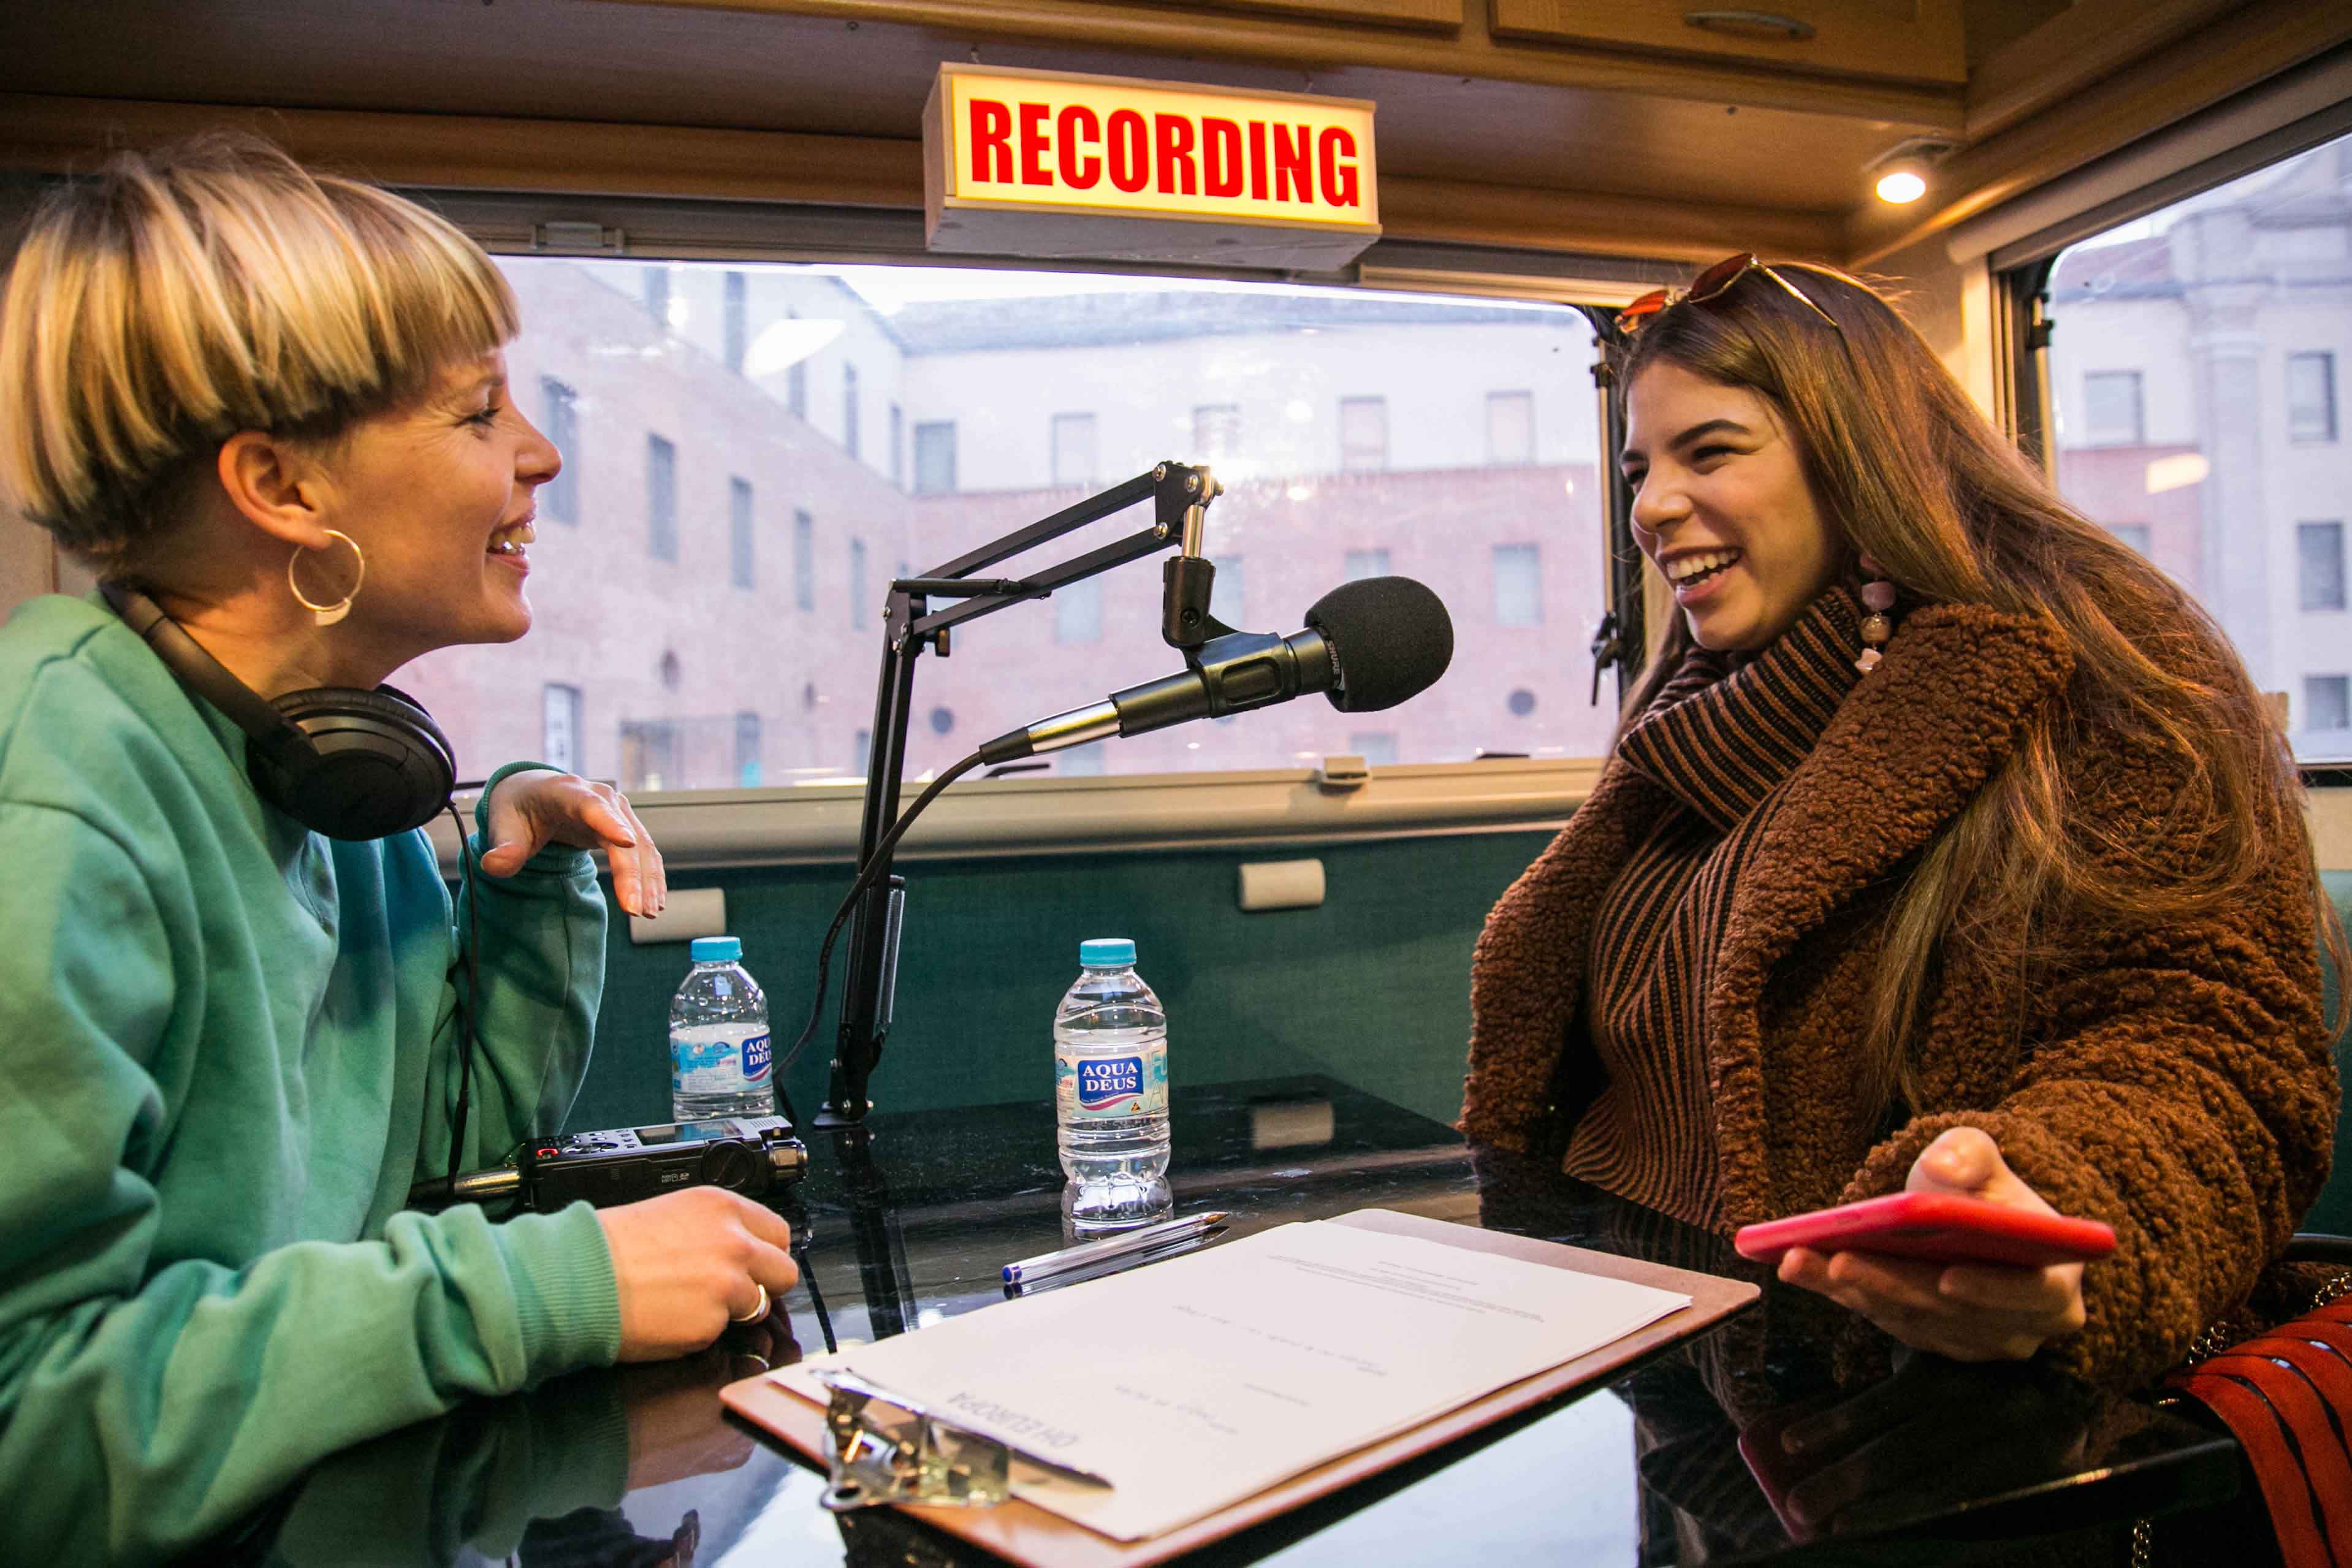 A photograph of two people in a recording studio.